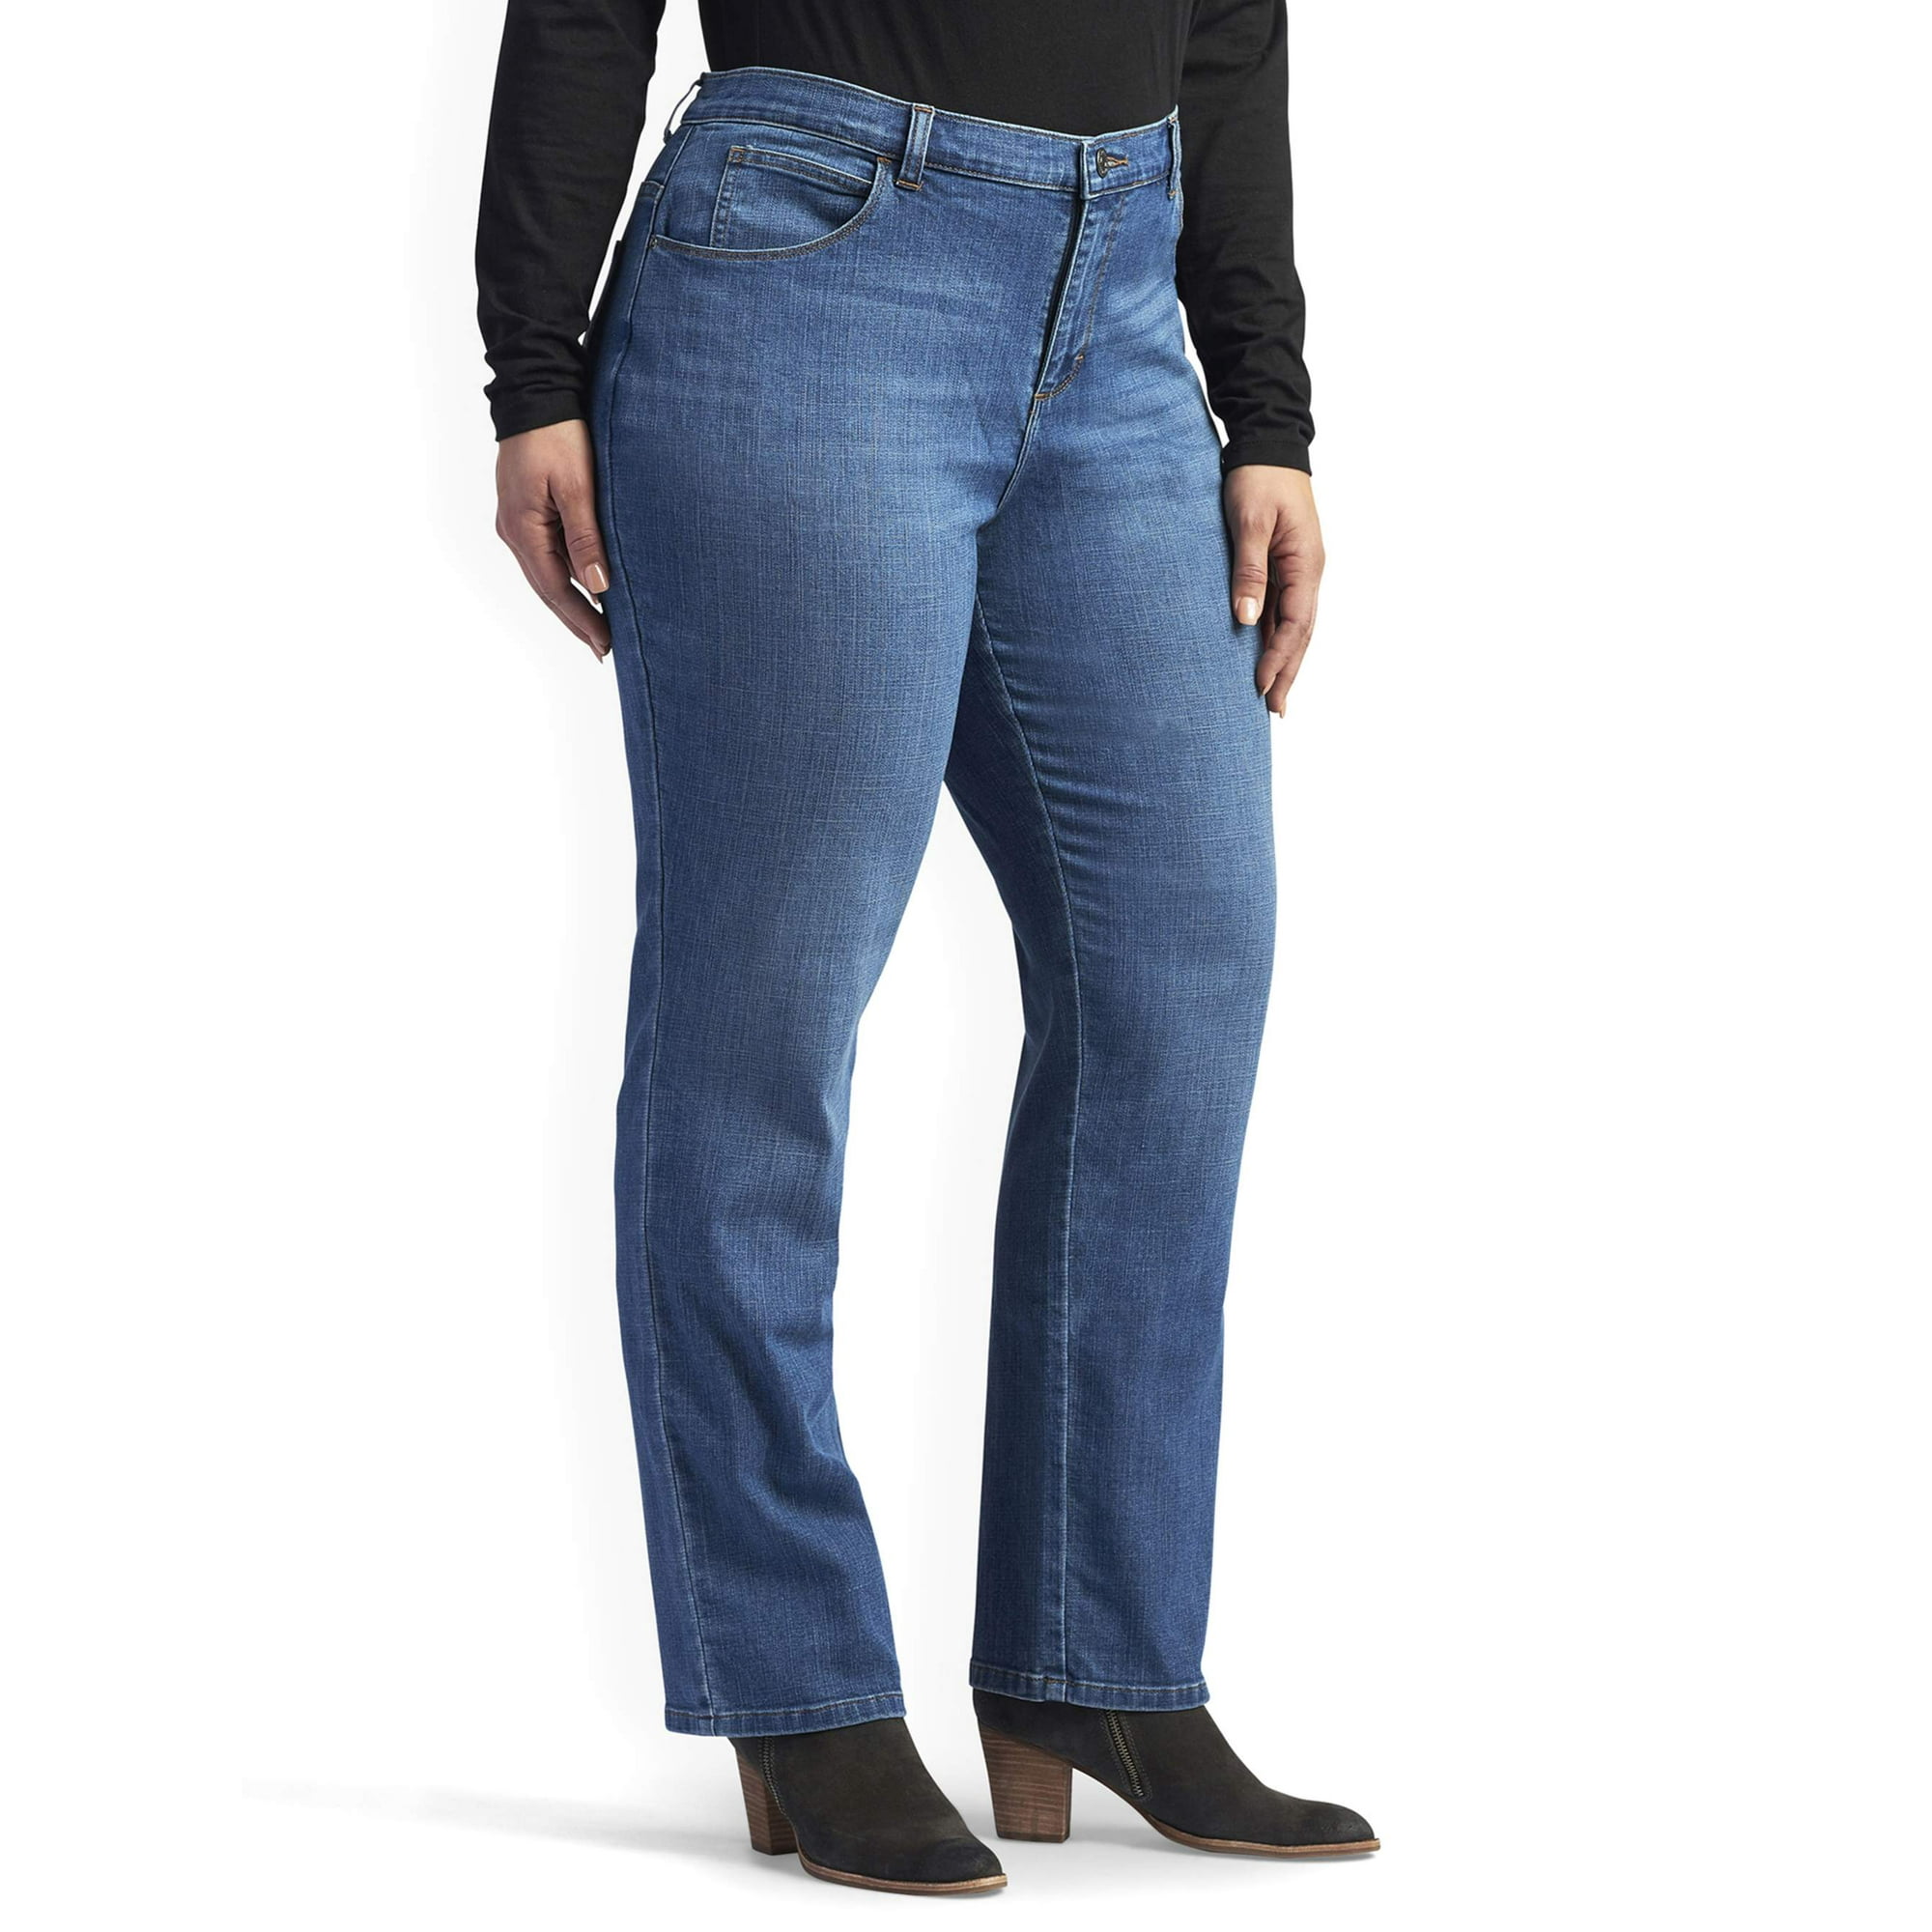 Lee Womens's Plus Stretch Relaxed Fit Leg Jean - Walmart.com